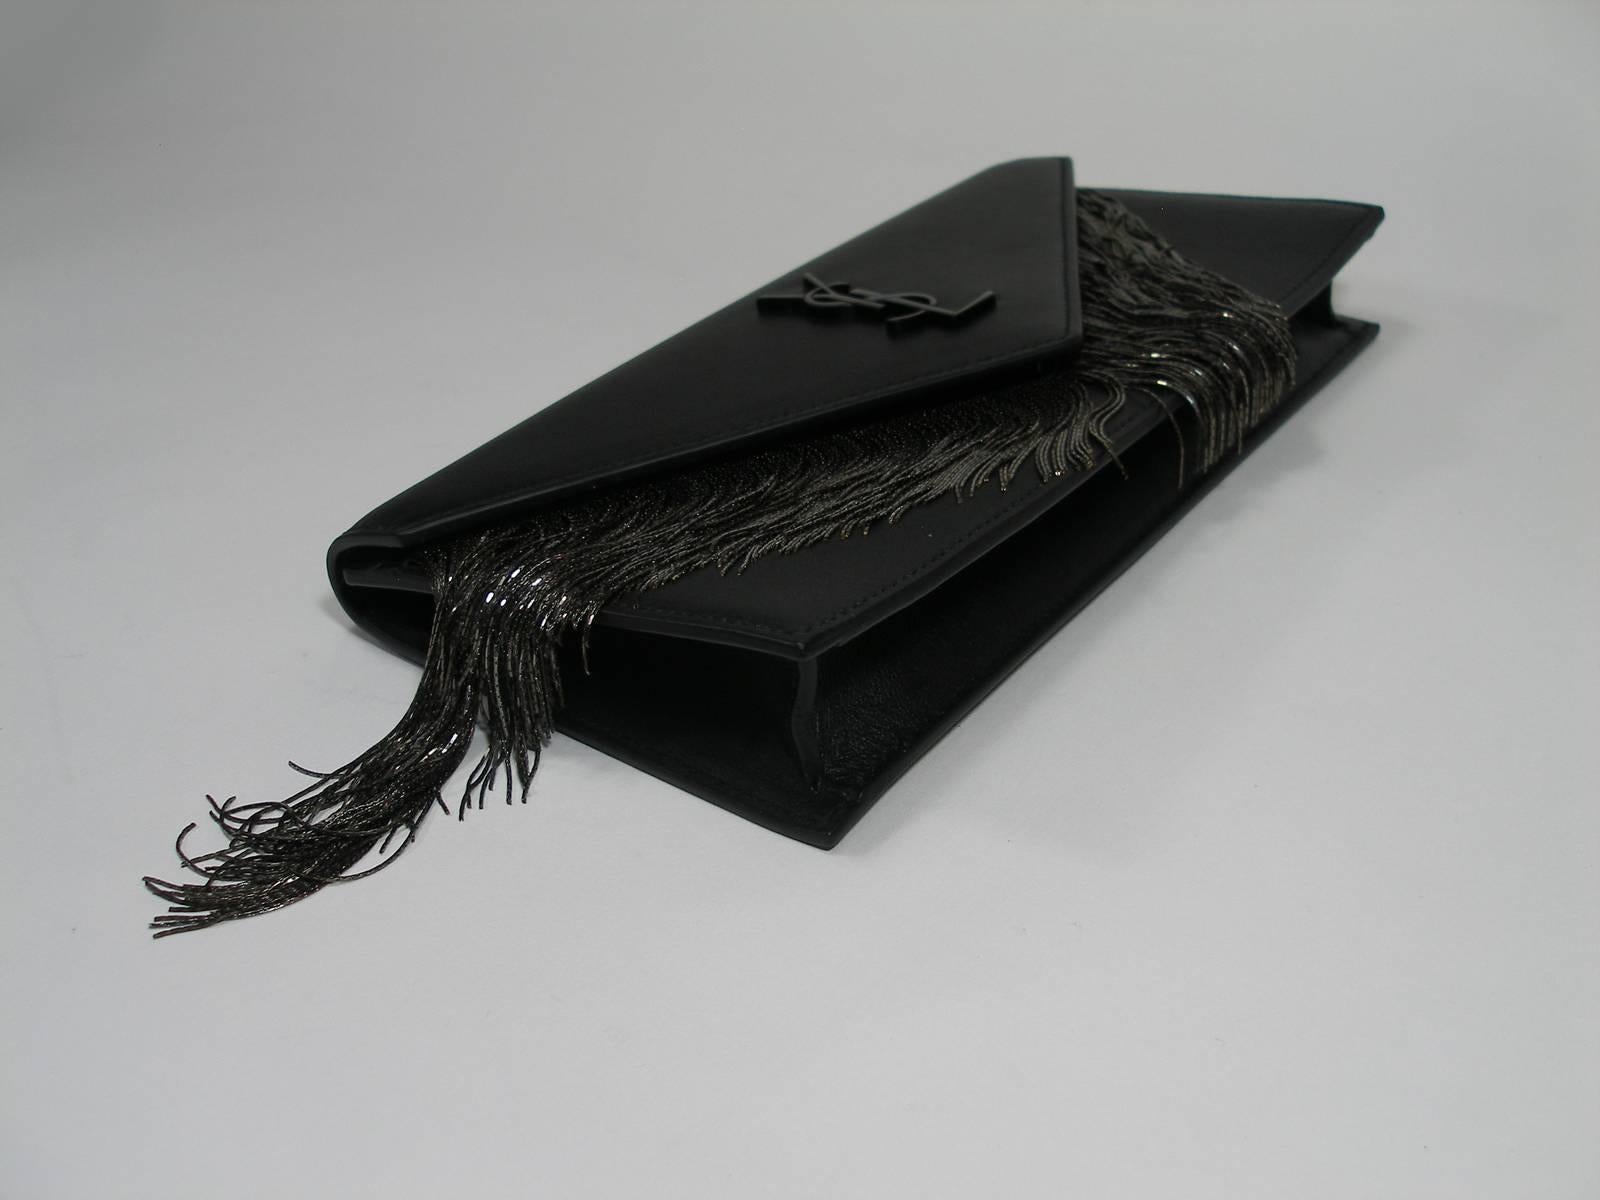 Yves Saint Laurent Le Sept Fringed Pouch in black leather / SOLD OUT in shop YSL For Sale 5